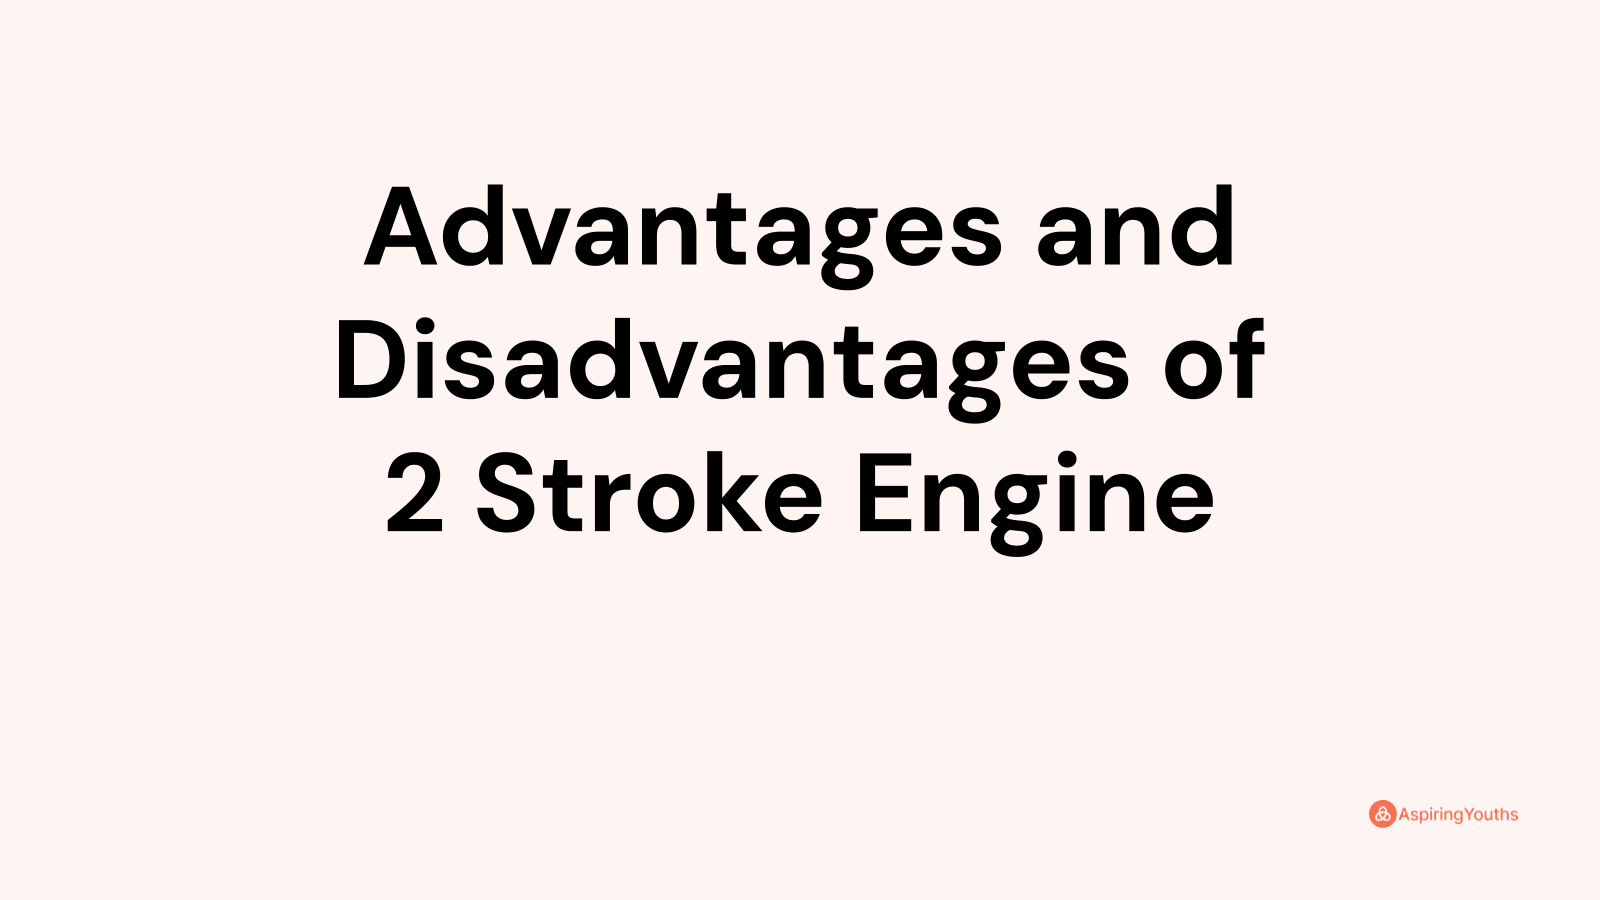 Advantages and disadvantages of 2 Stroke Engine